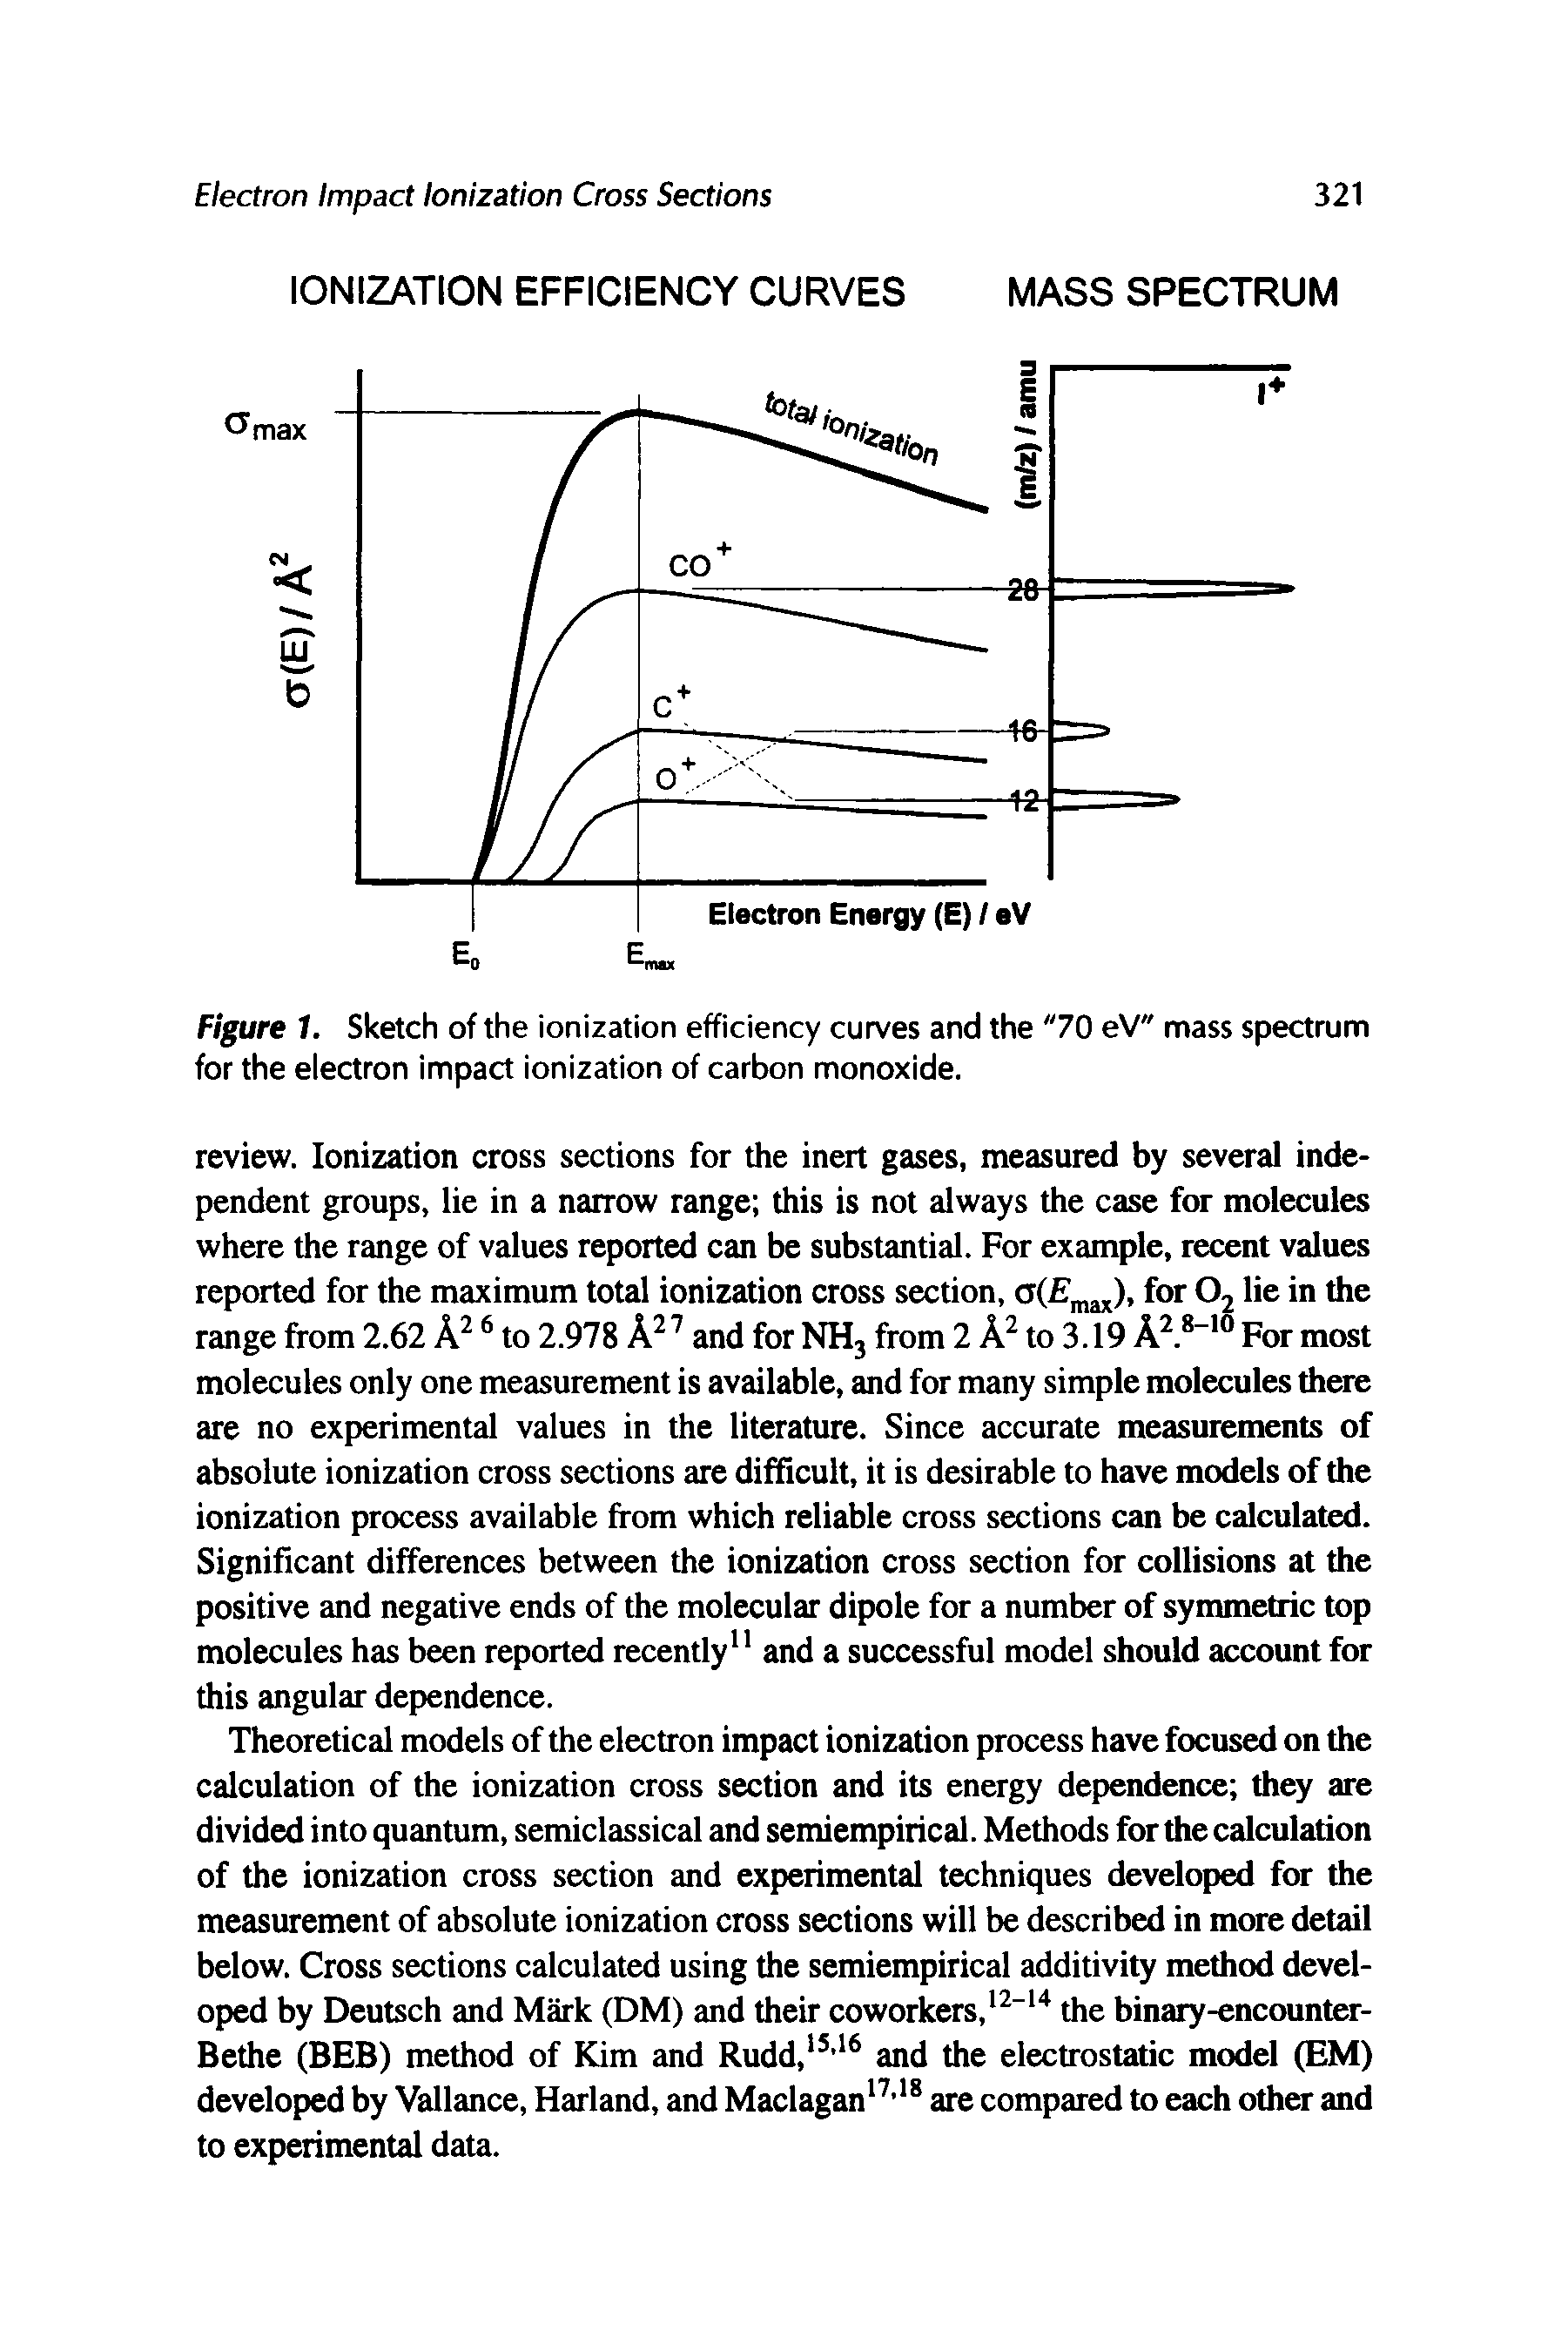 Figure 1. Sketch of the ionization efficiency curves and the "70 eV" mass spectrum for the electron impact ionization of carbon monoxide.